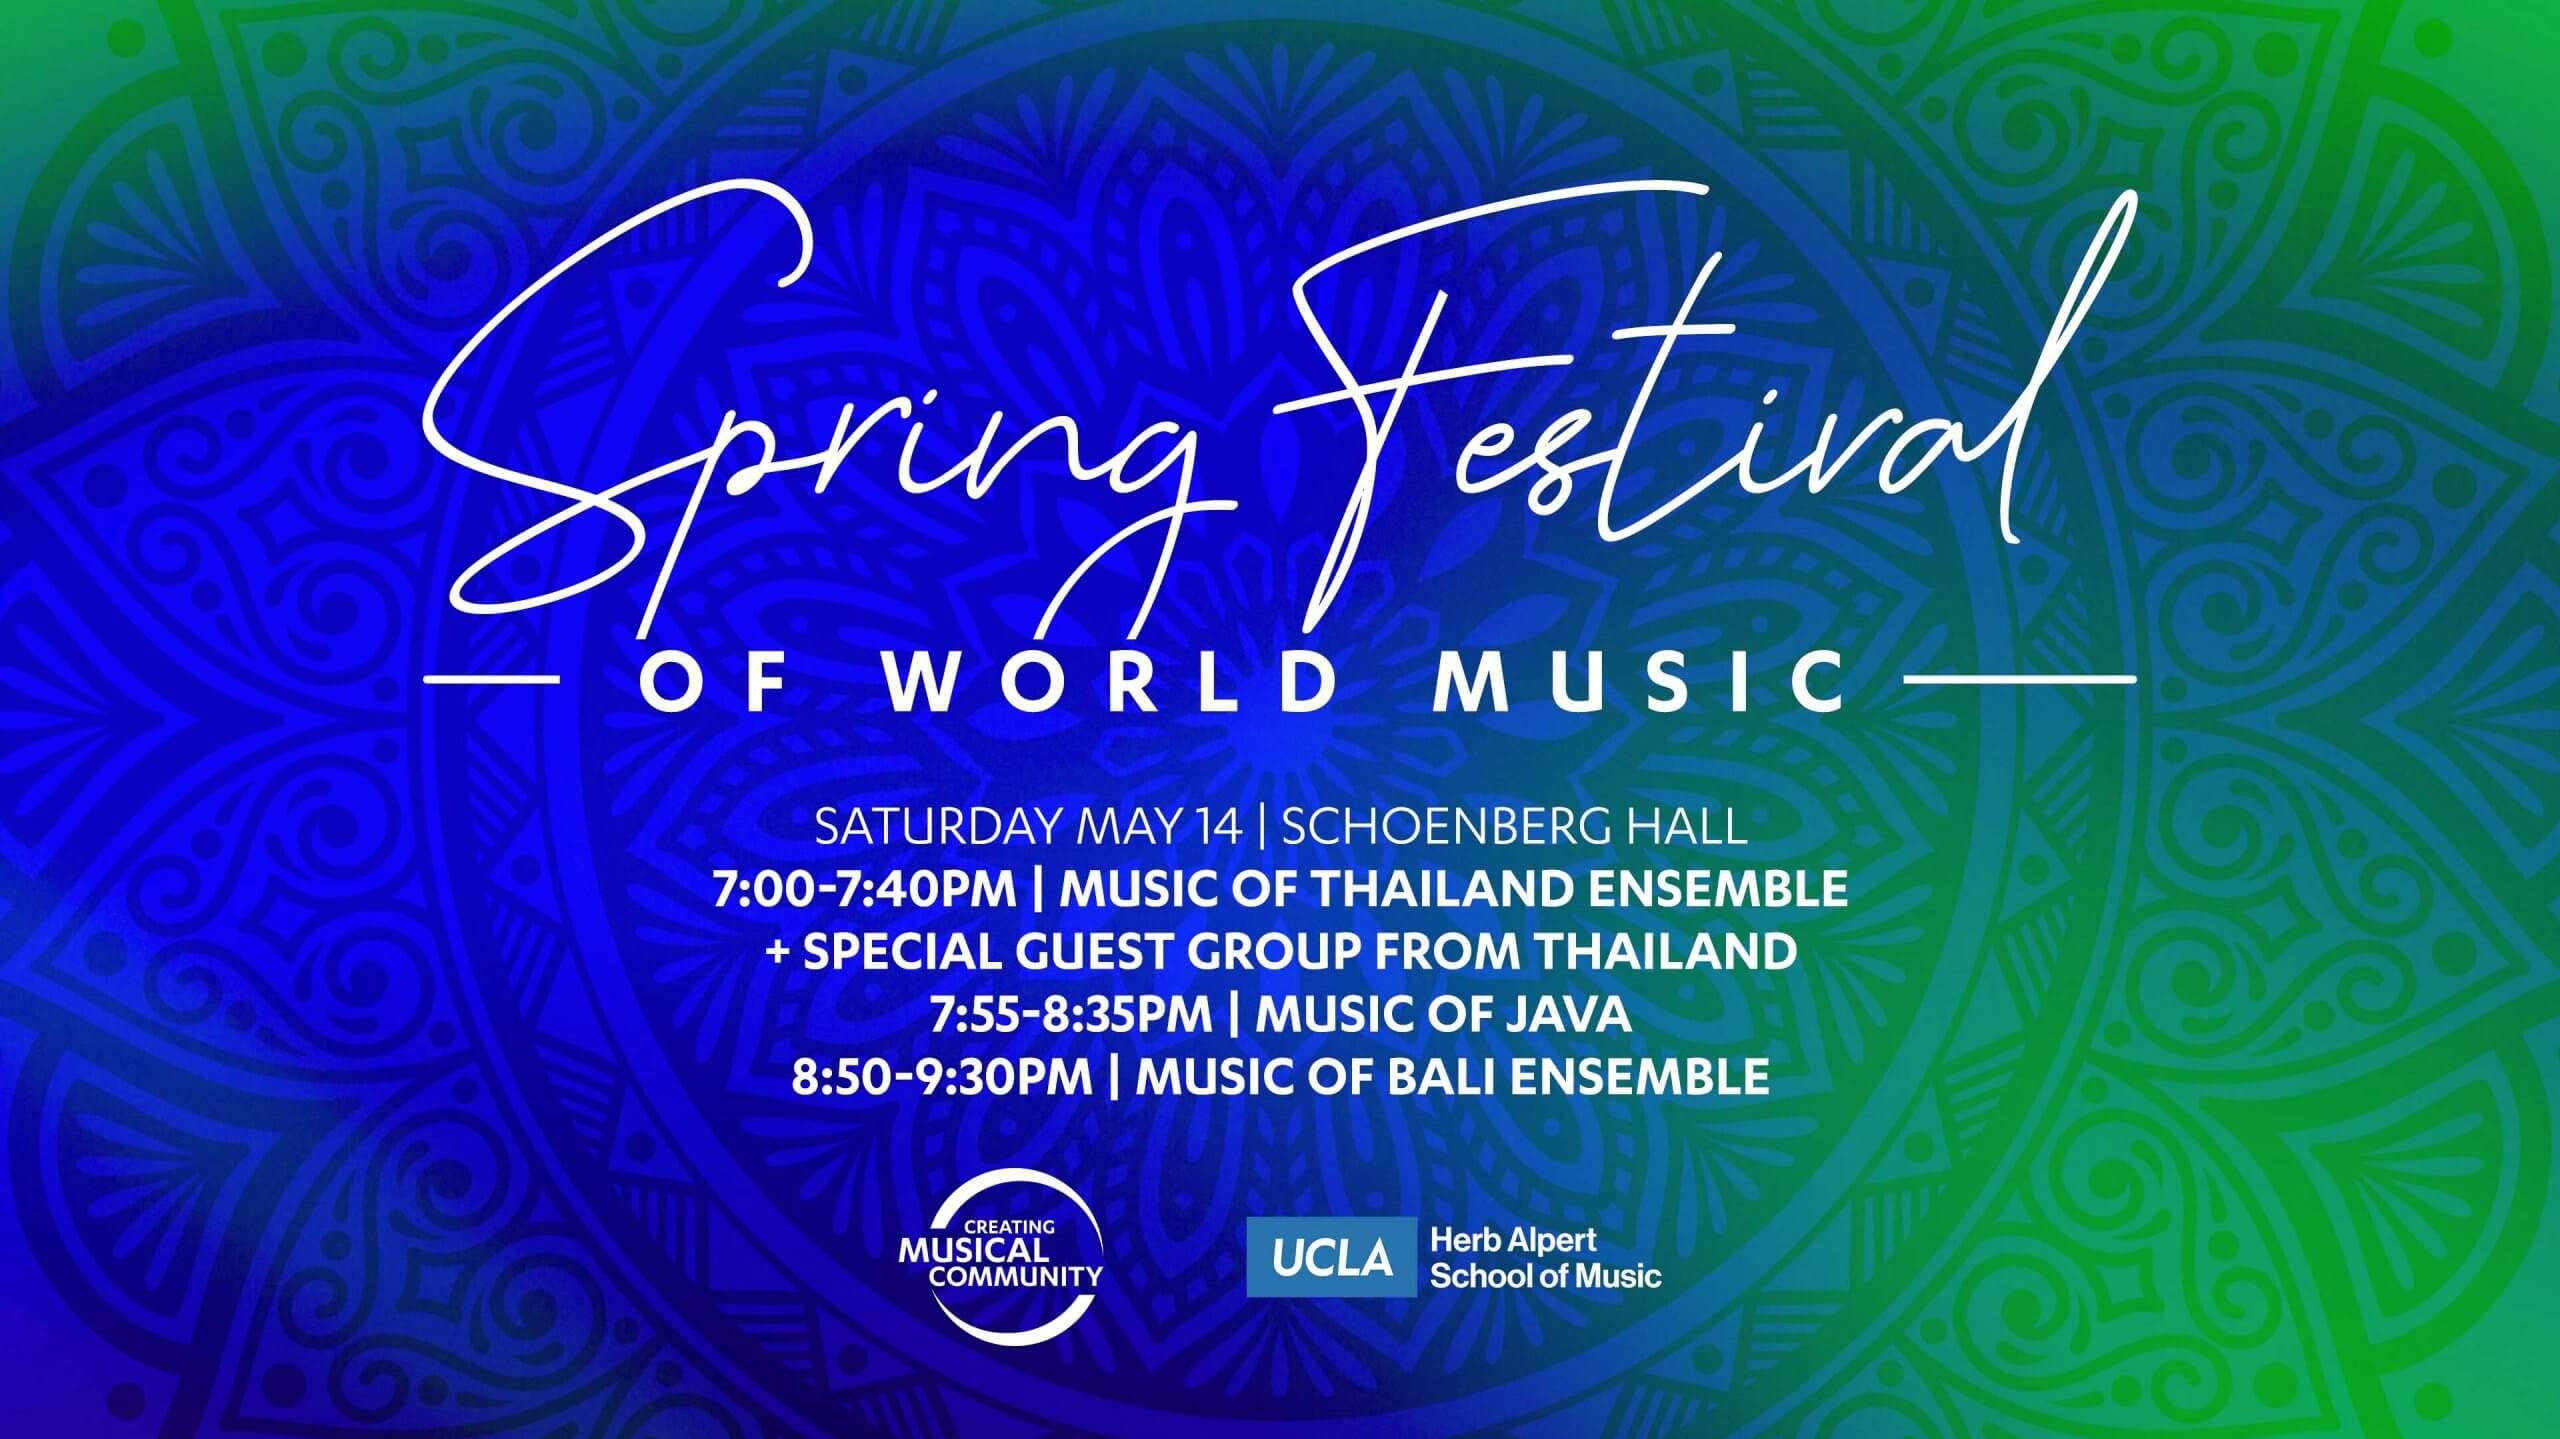 Music of Bali Java and Thailand Ensembles with Special Guest